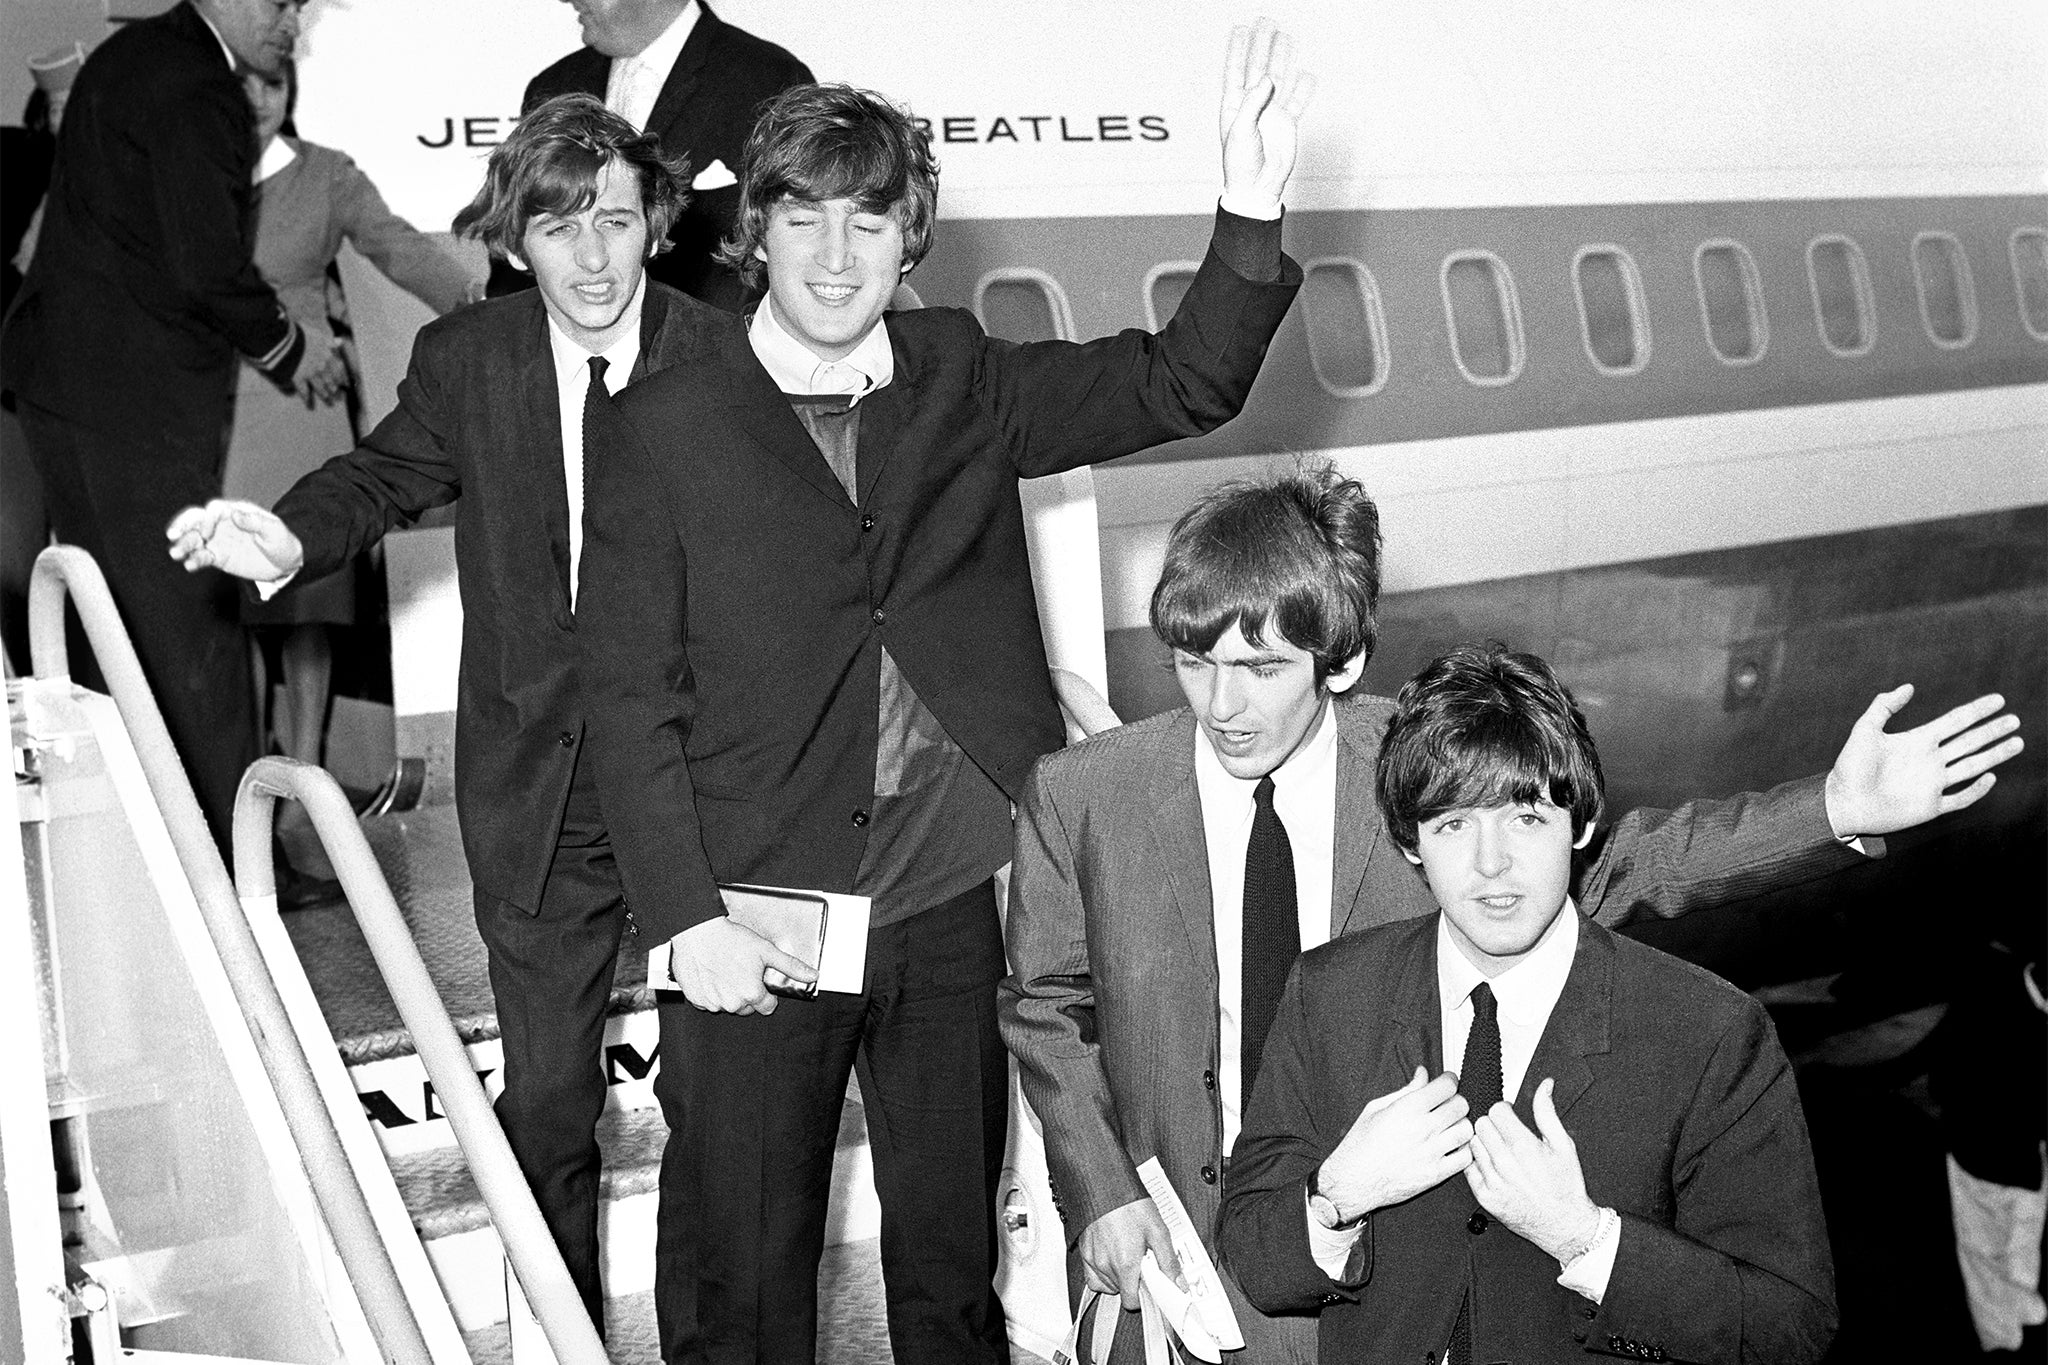 We have lift-off: (from left) Ringo Starr, John Lennon, George Harrison and Paul McCartney board their plane at Heathrow airport for their tour of America in 1964